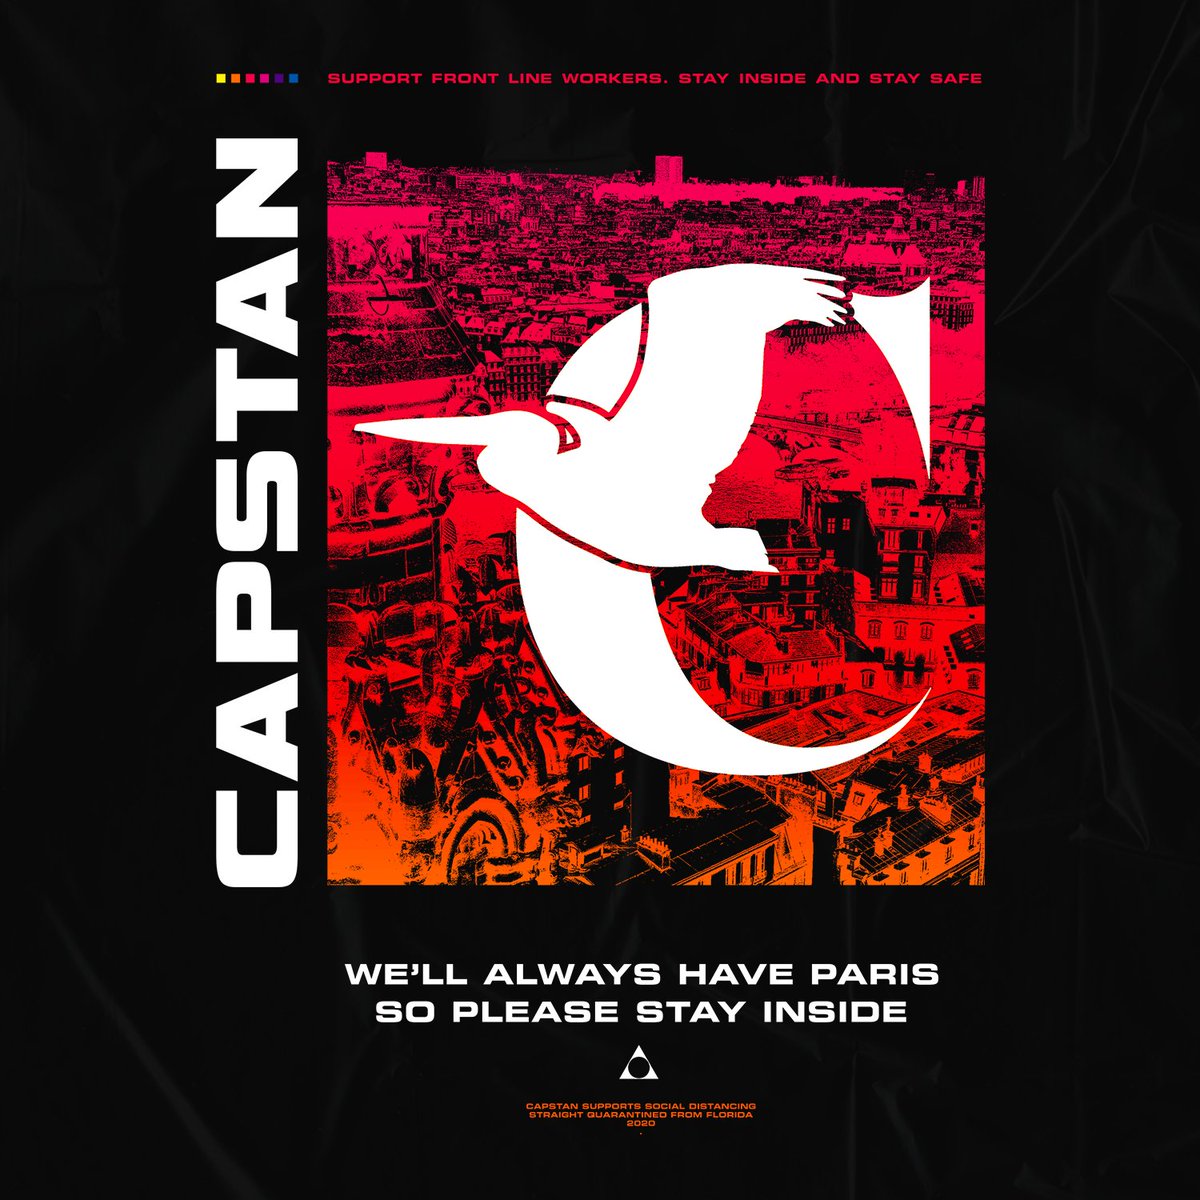 We launched some new t-shirts today through 
@AbsoluteMerch, to promote being responsible and safe so we can all get back to doing what we love sooner than later. ⁣⁣Available till May 11th 🎼💙
capstan.absolutemerch.com